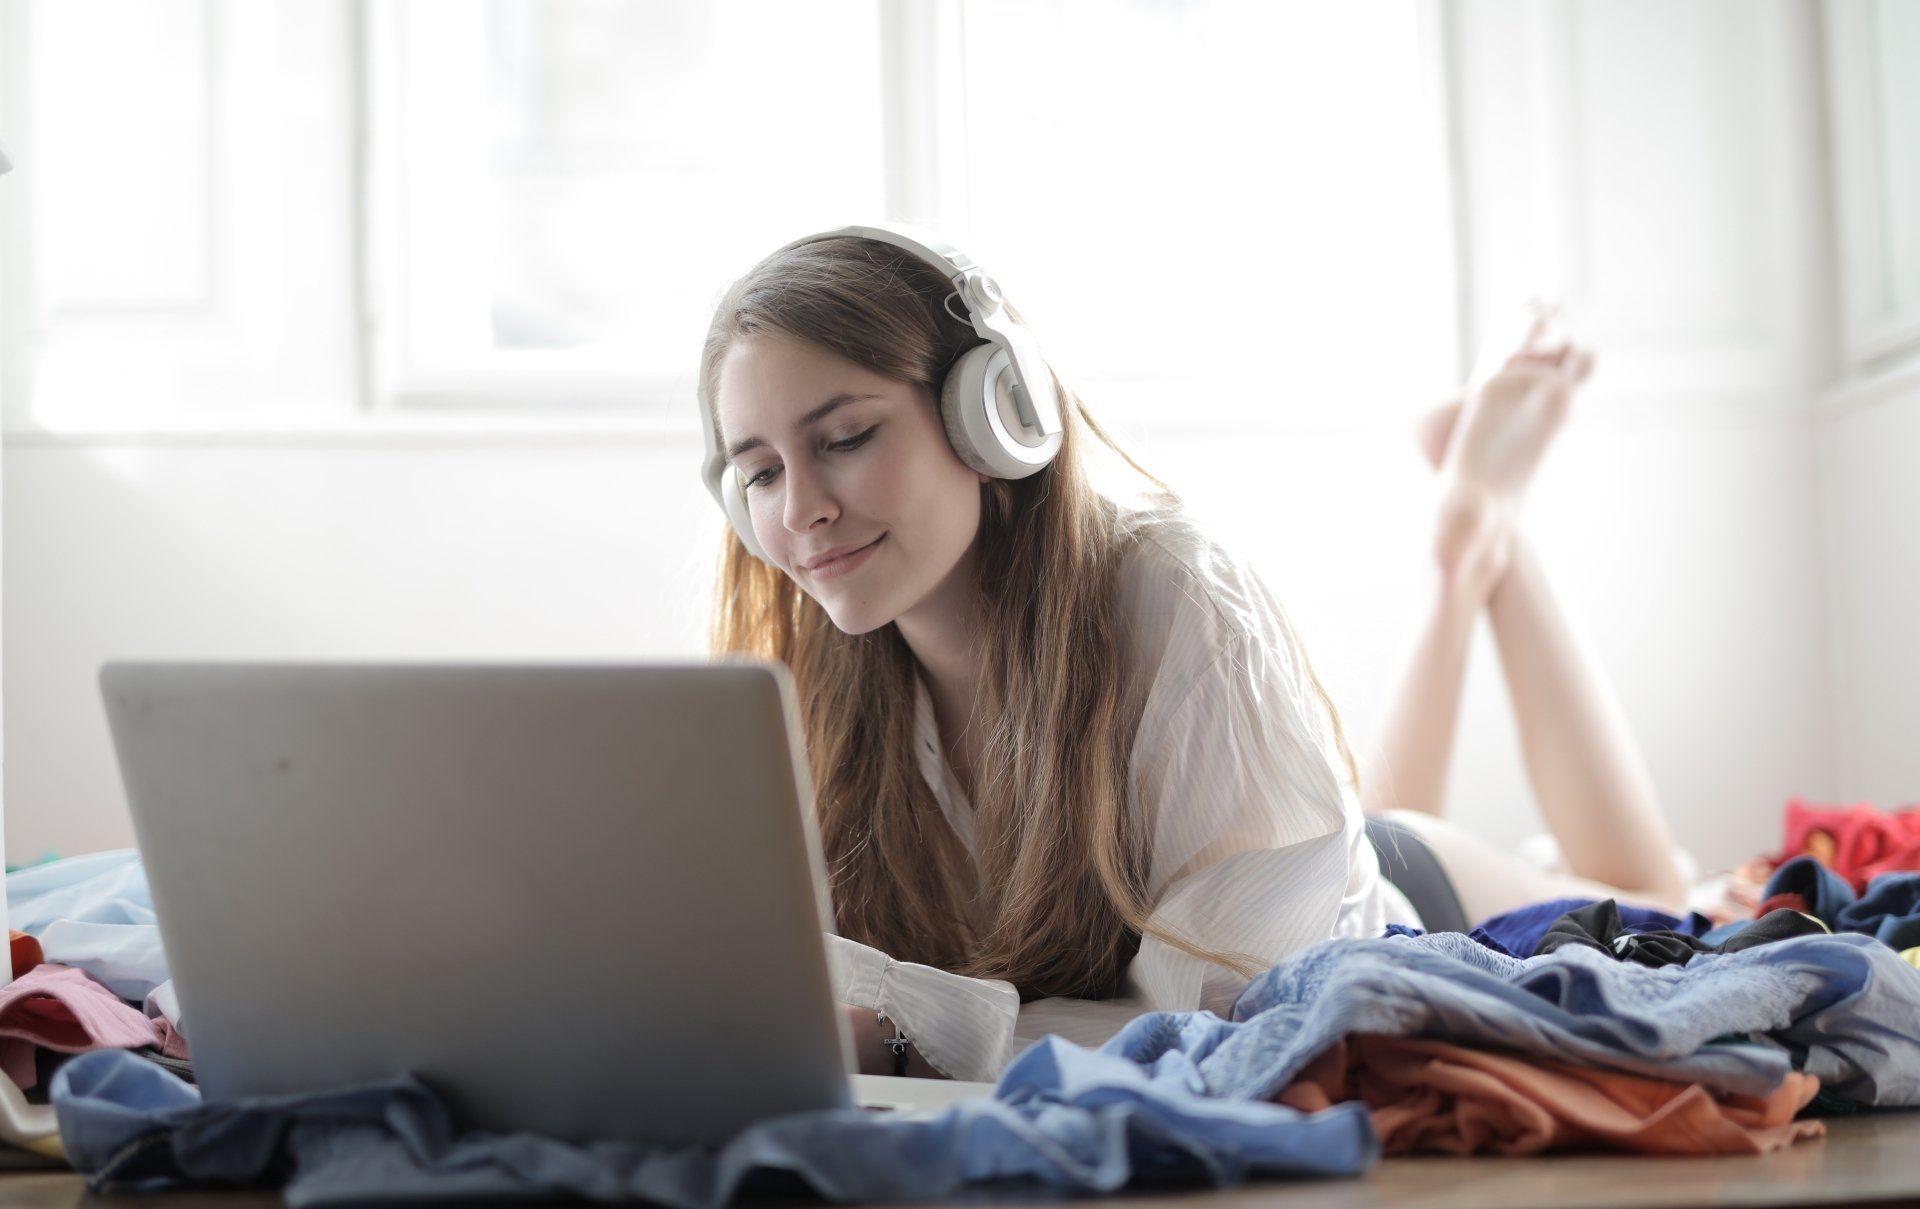  A girl lying on the floor, listening with headphones on